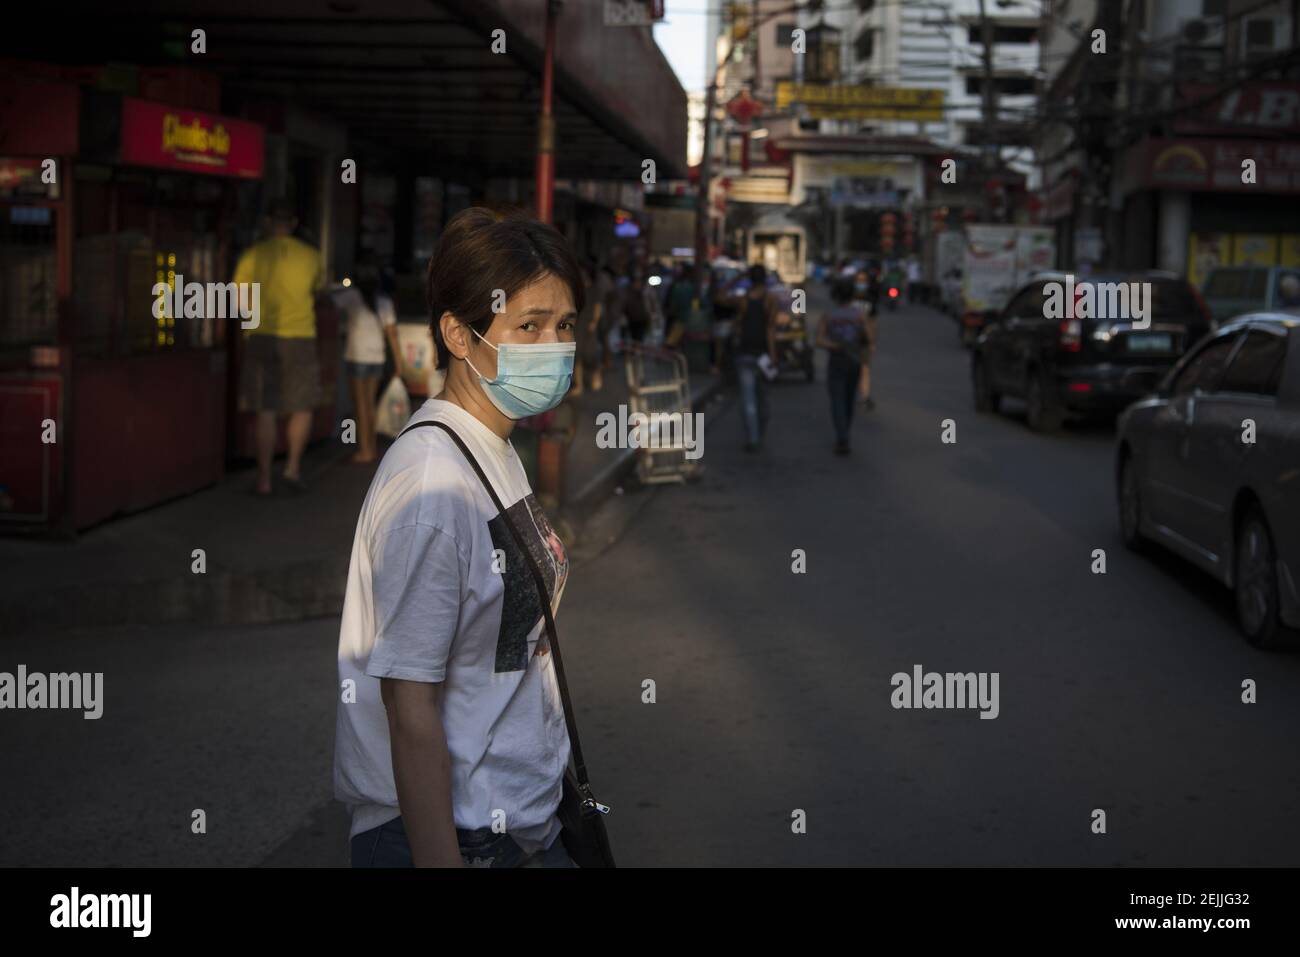 A woman wears a face mask in Manila's Chinatown district as a precaution to the outbreak of the coronavirus. Filipinos remain anxious over a new coronavirus known as Covid-19 which originated in Wuhan, China in December 2019. The Philippines’ Department of Health announced the country’s first death due to the virus on 2 February - the first reported death outside of China. The number of 2019-nCoV cases worldwide has already surpassed that of the 2003 Sars epidemic, with the death toll now over 1300. (Photo by Oliver Haynes / SOPA Images/Sipa USA) Stock Photo